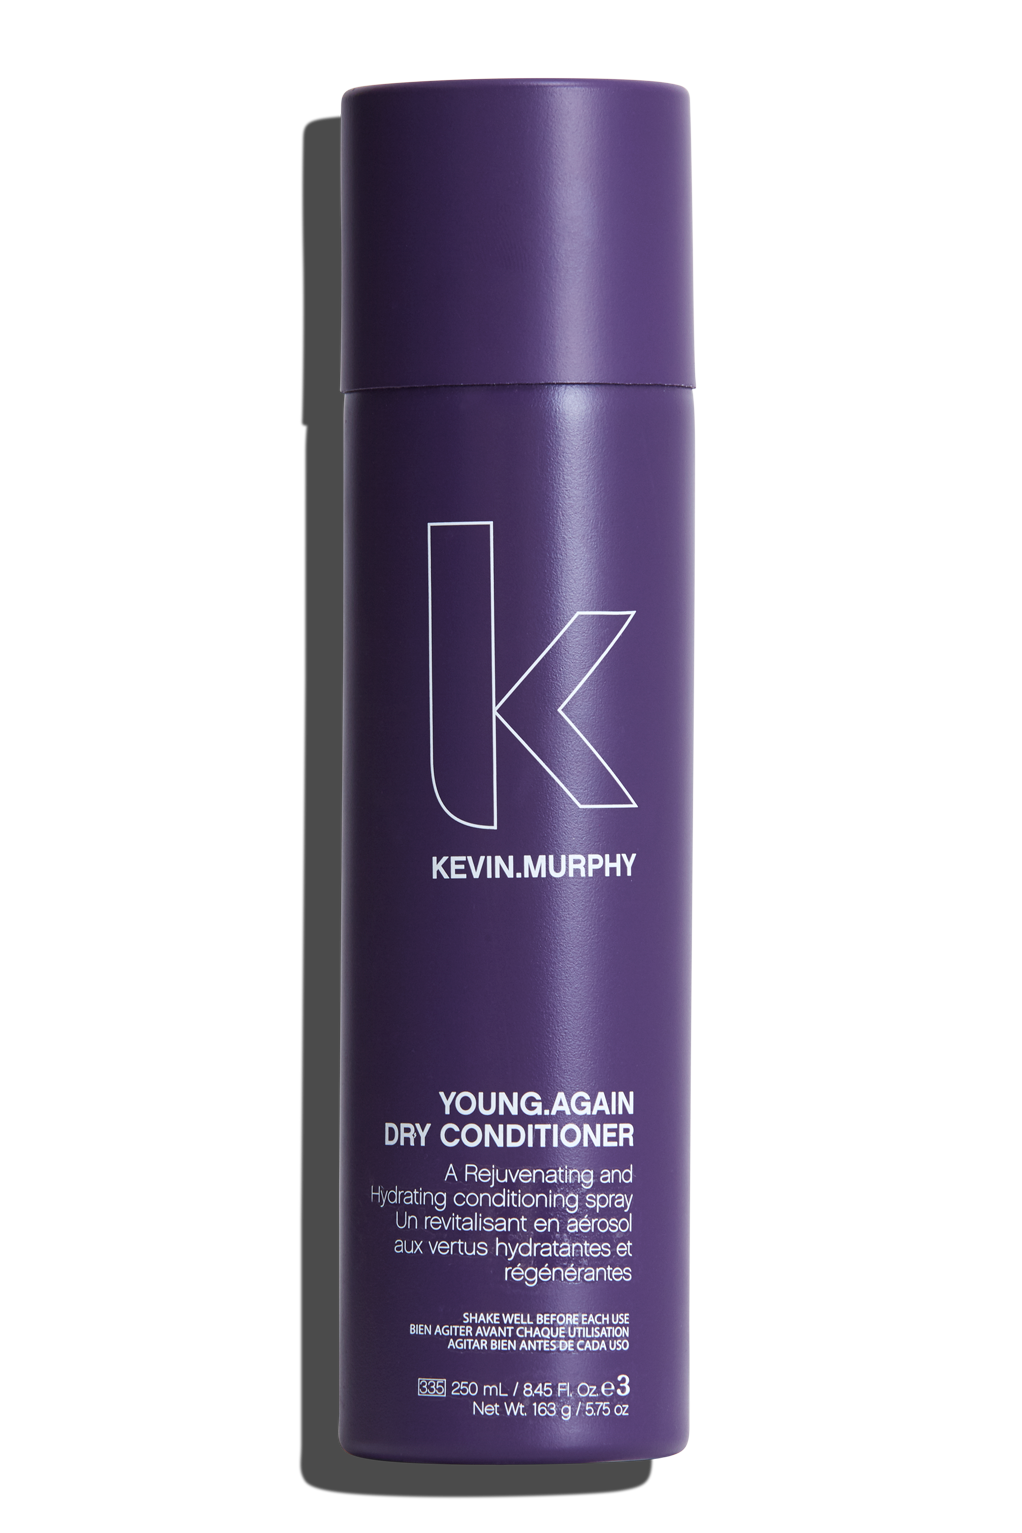 Kevin Murphy YOUNG.AGAIN DRY CONDITIONER